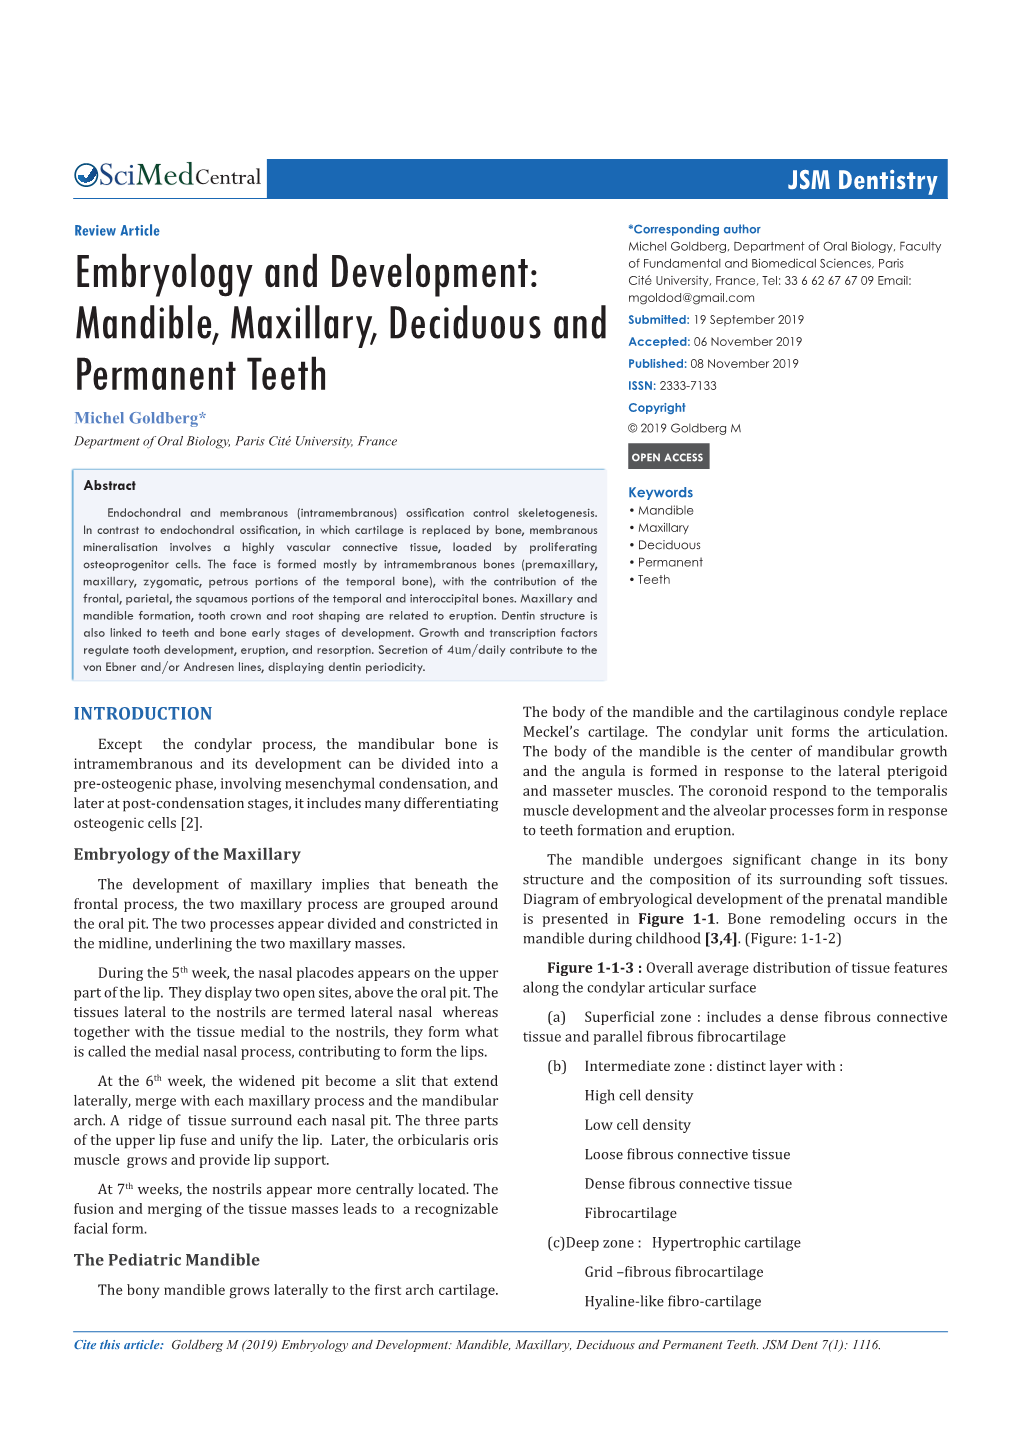 Embryology and Development: Mandible, Maxillary, Deciduous and Permanent Teeth